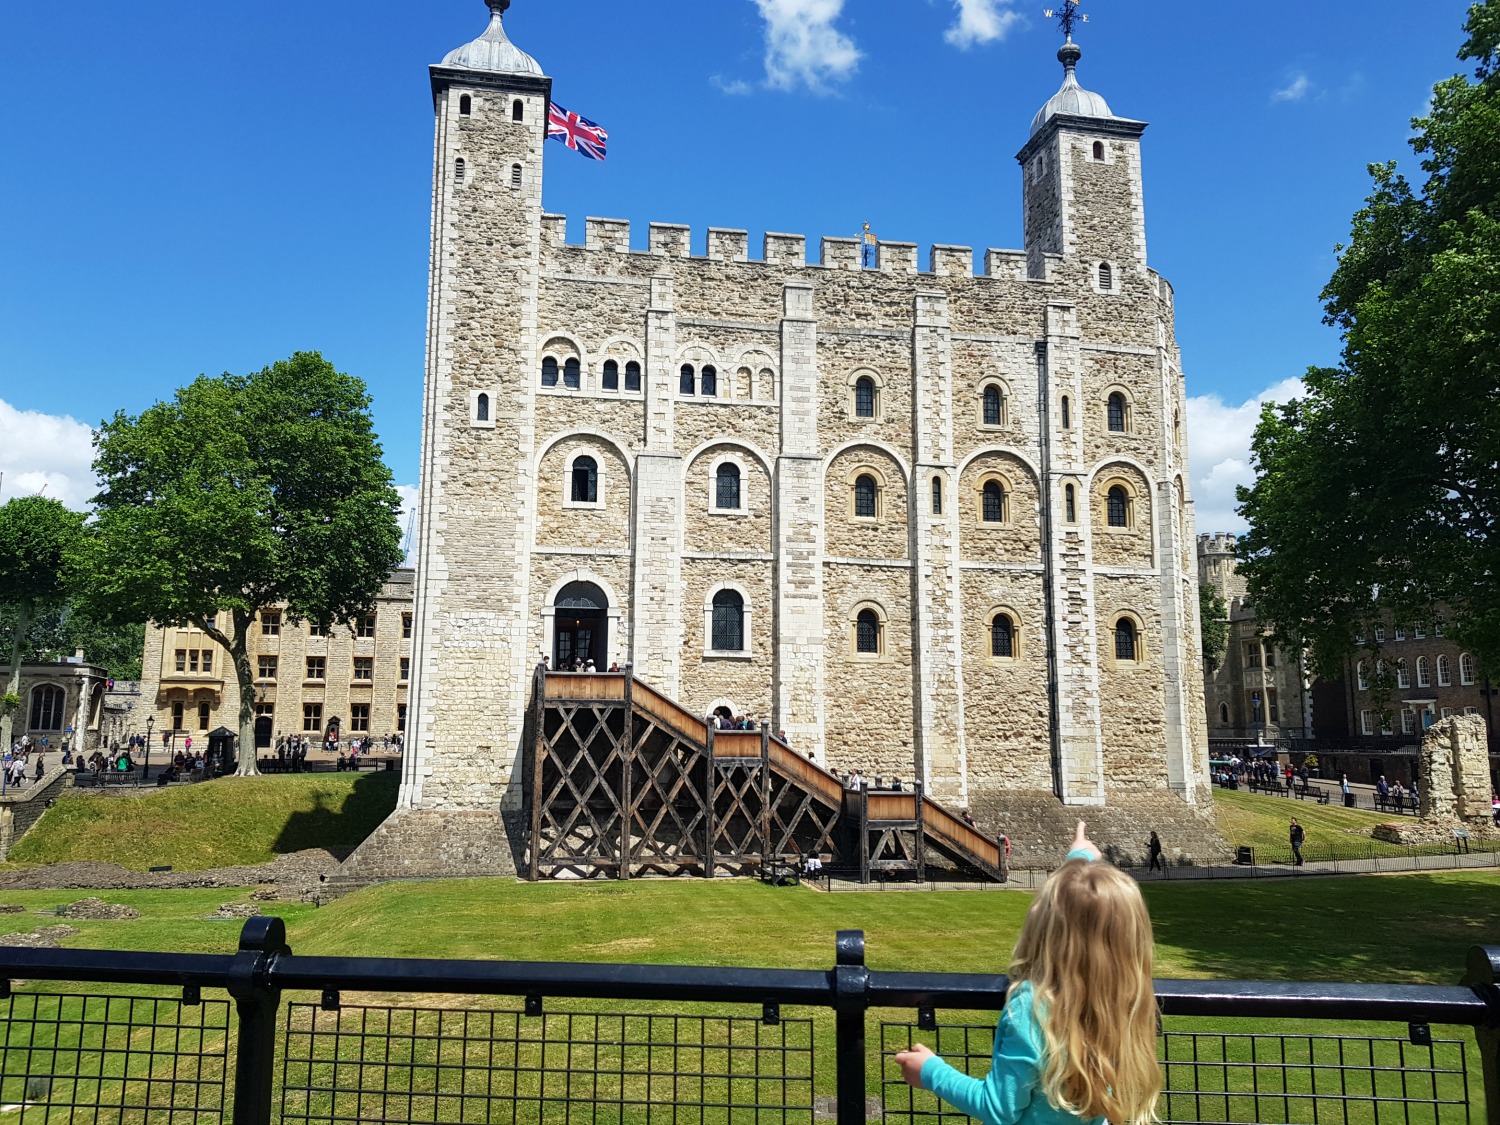 My daughter points up at the White Tower in the Tower of London with blue skies in the background - the family activities this February half-term involve Isaac Newton